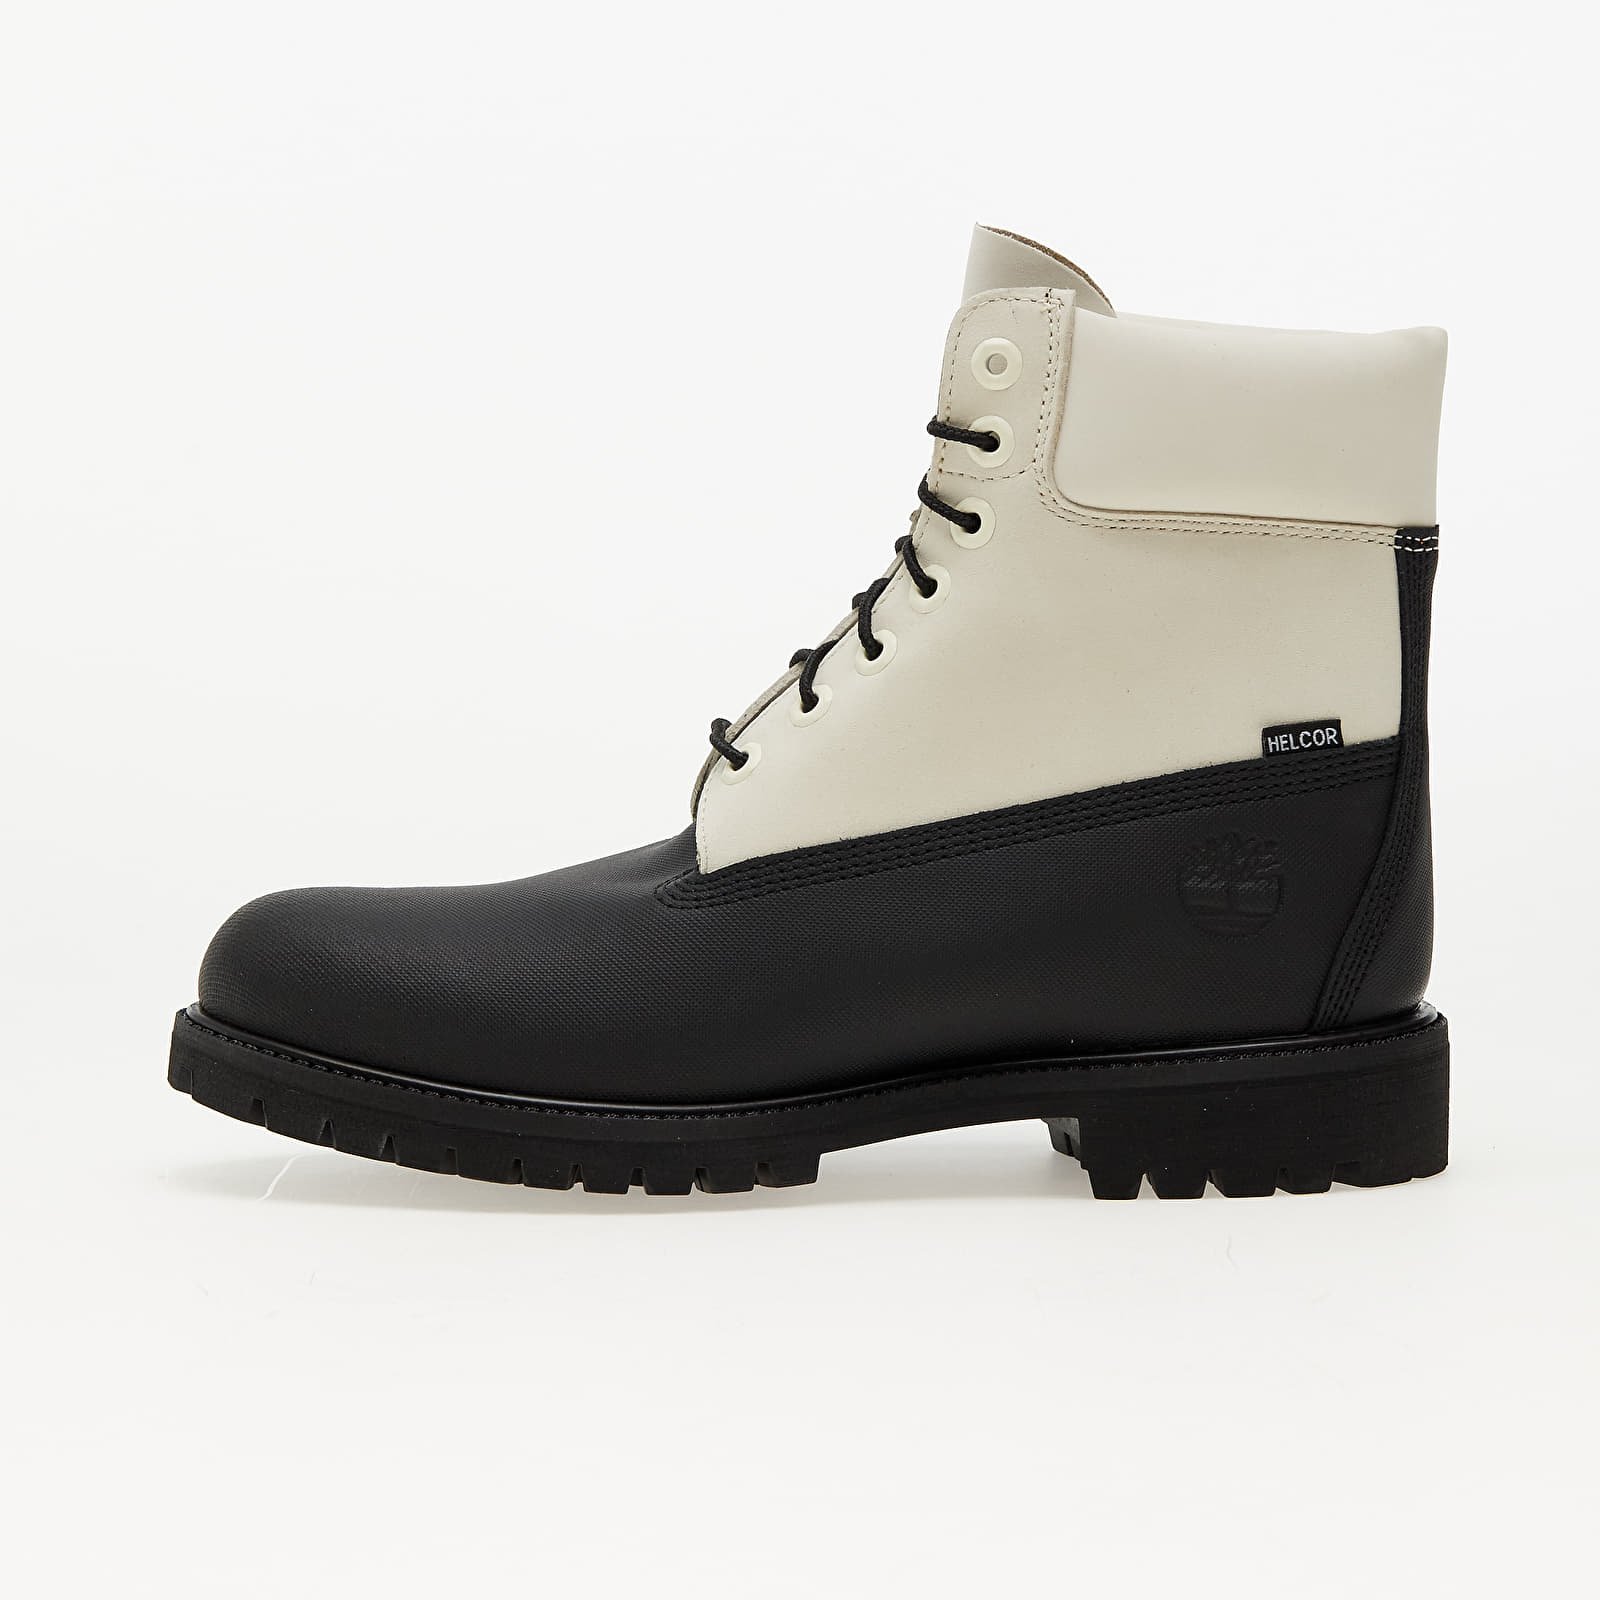 6 Inch Lace Up Waterproof Boot Black